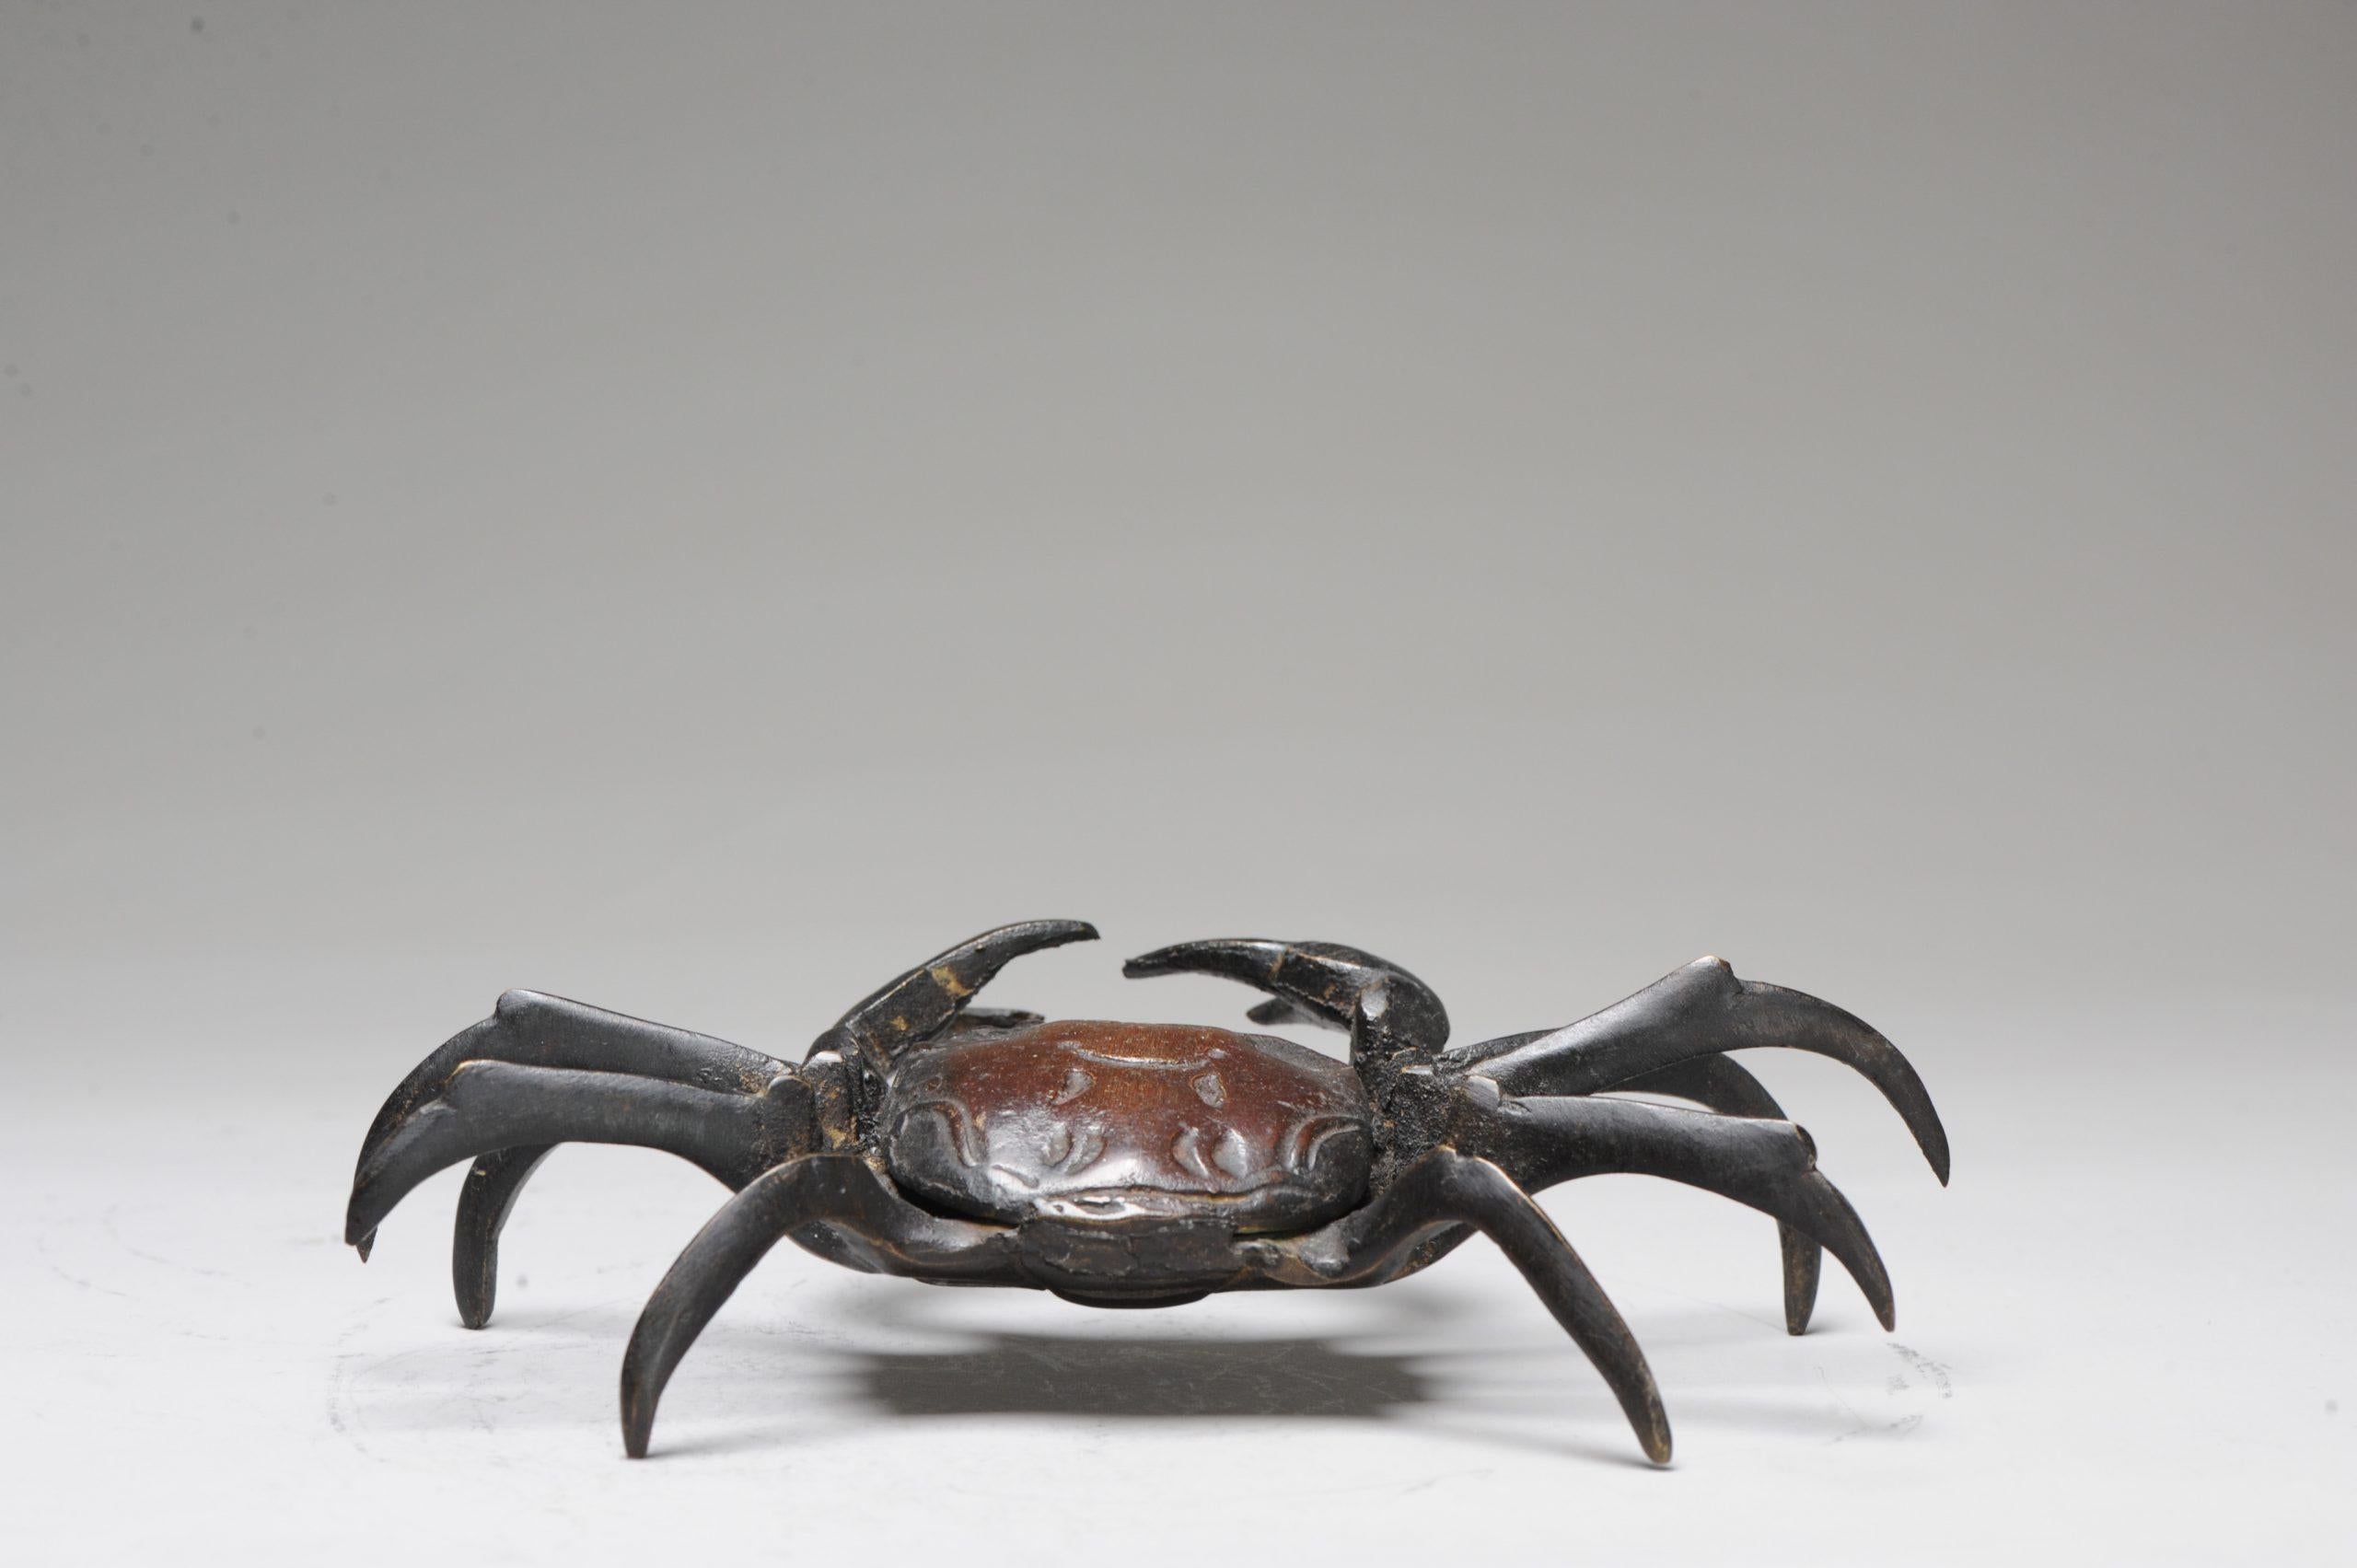 Antique Okimono Bronze Japanese Statue of a Crab 19th C Meiji Japan For Sale 3